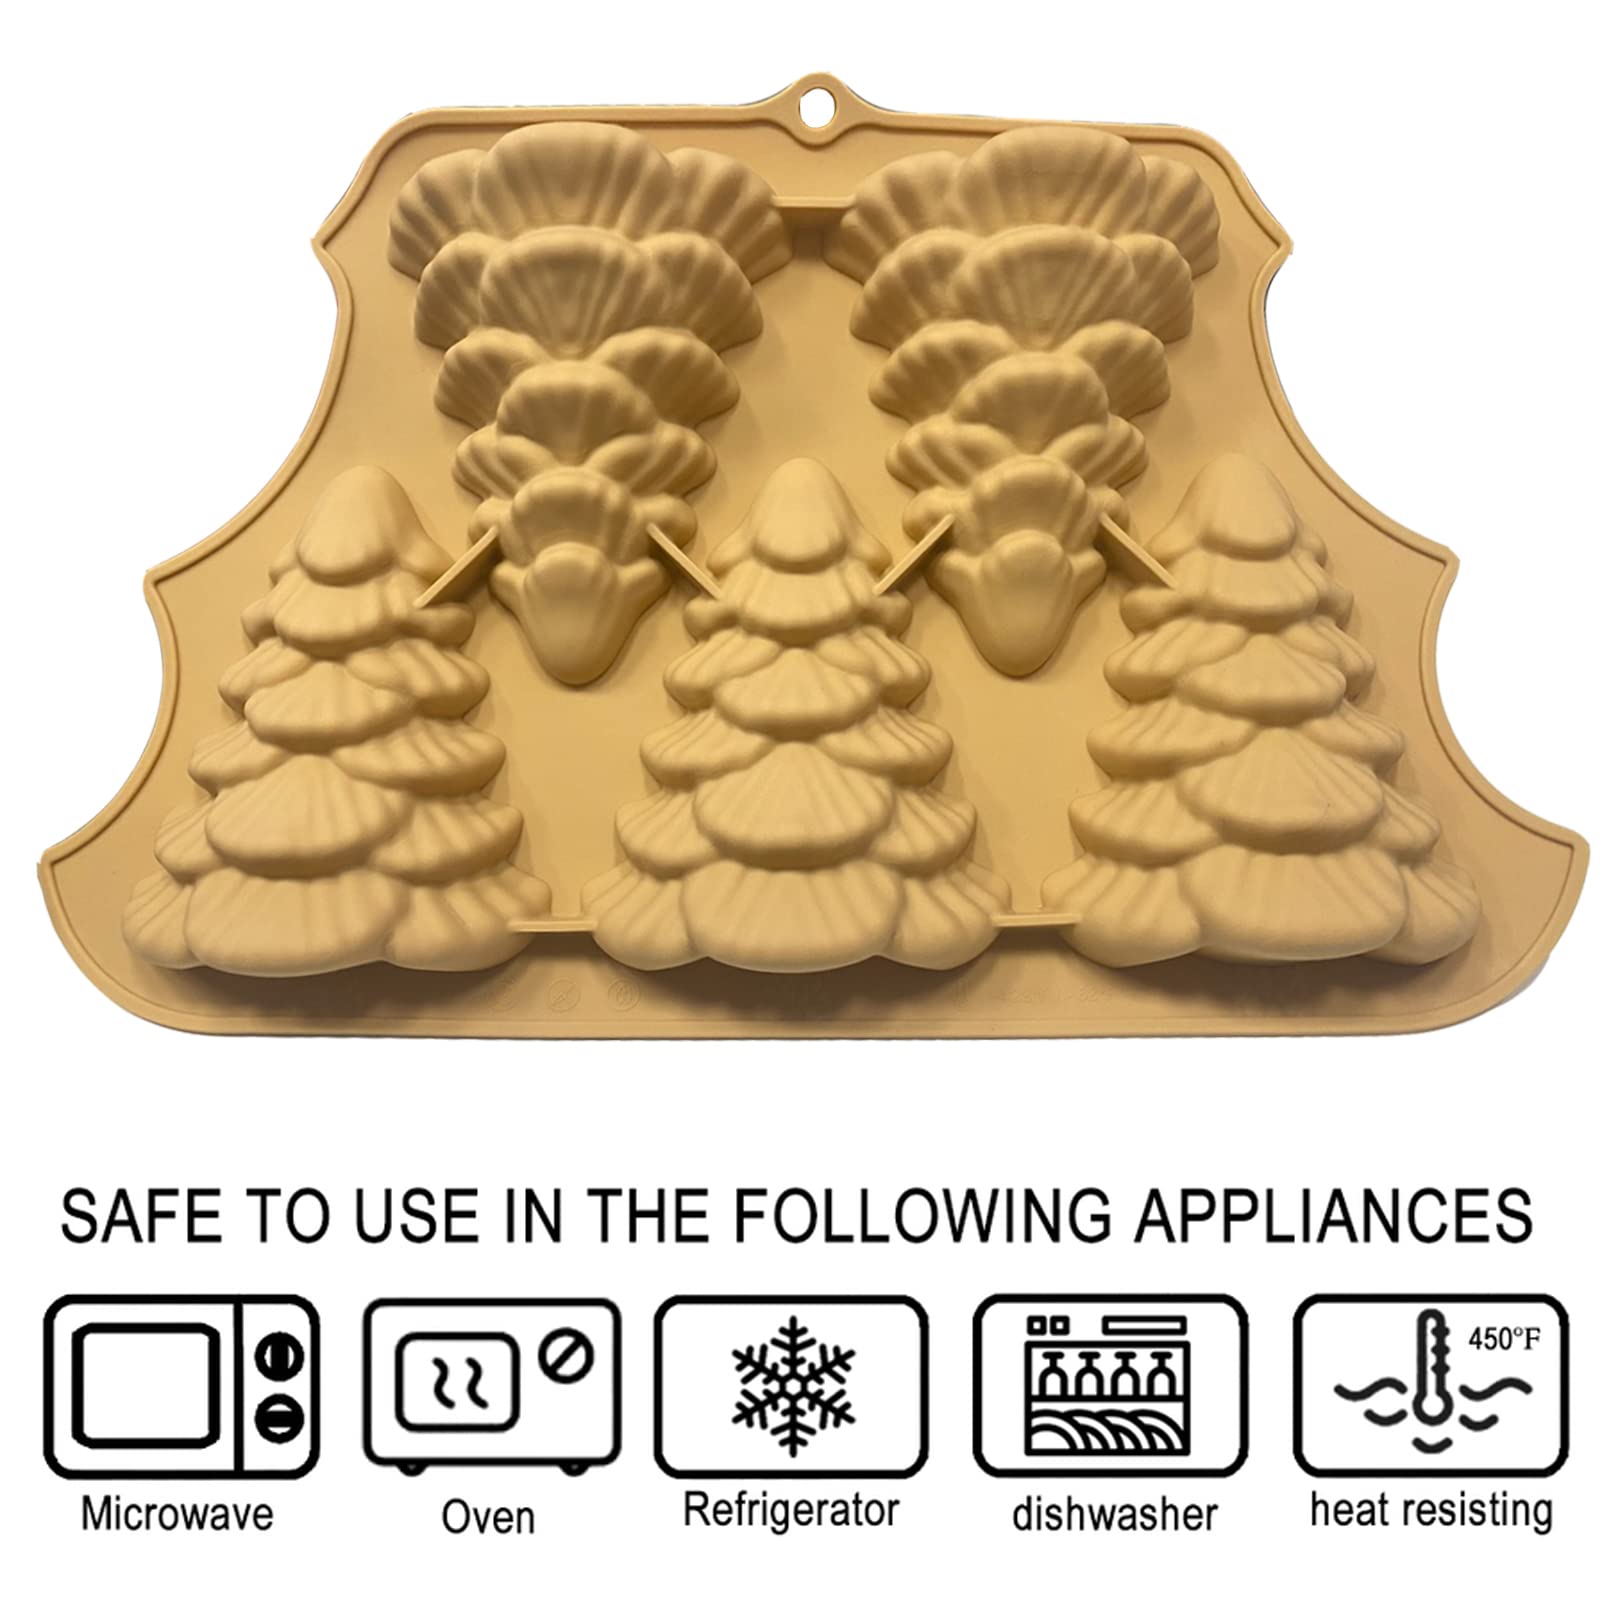 3D Christmas Tree Baking Mould cake pan silicone mold,5 cavities christmas tree for bread, mousse cake,muffins,ice cubes